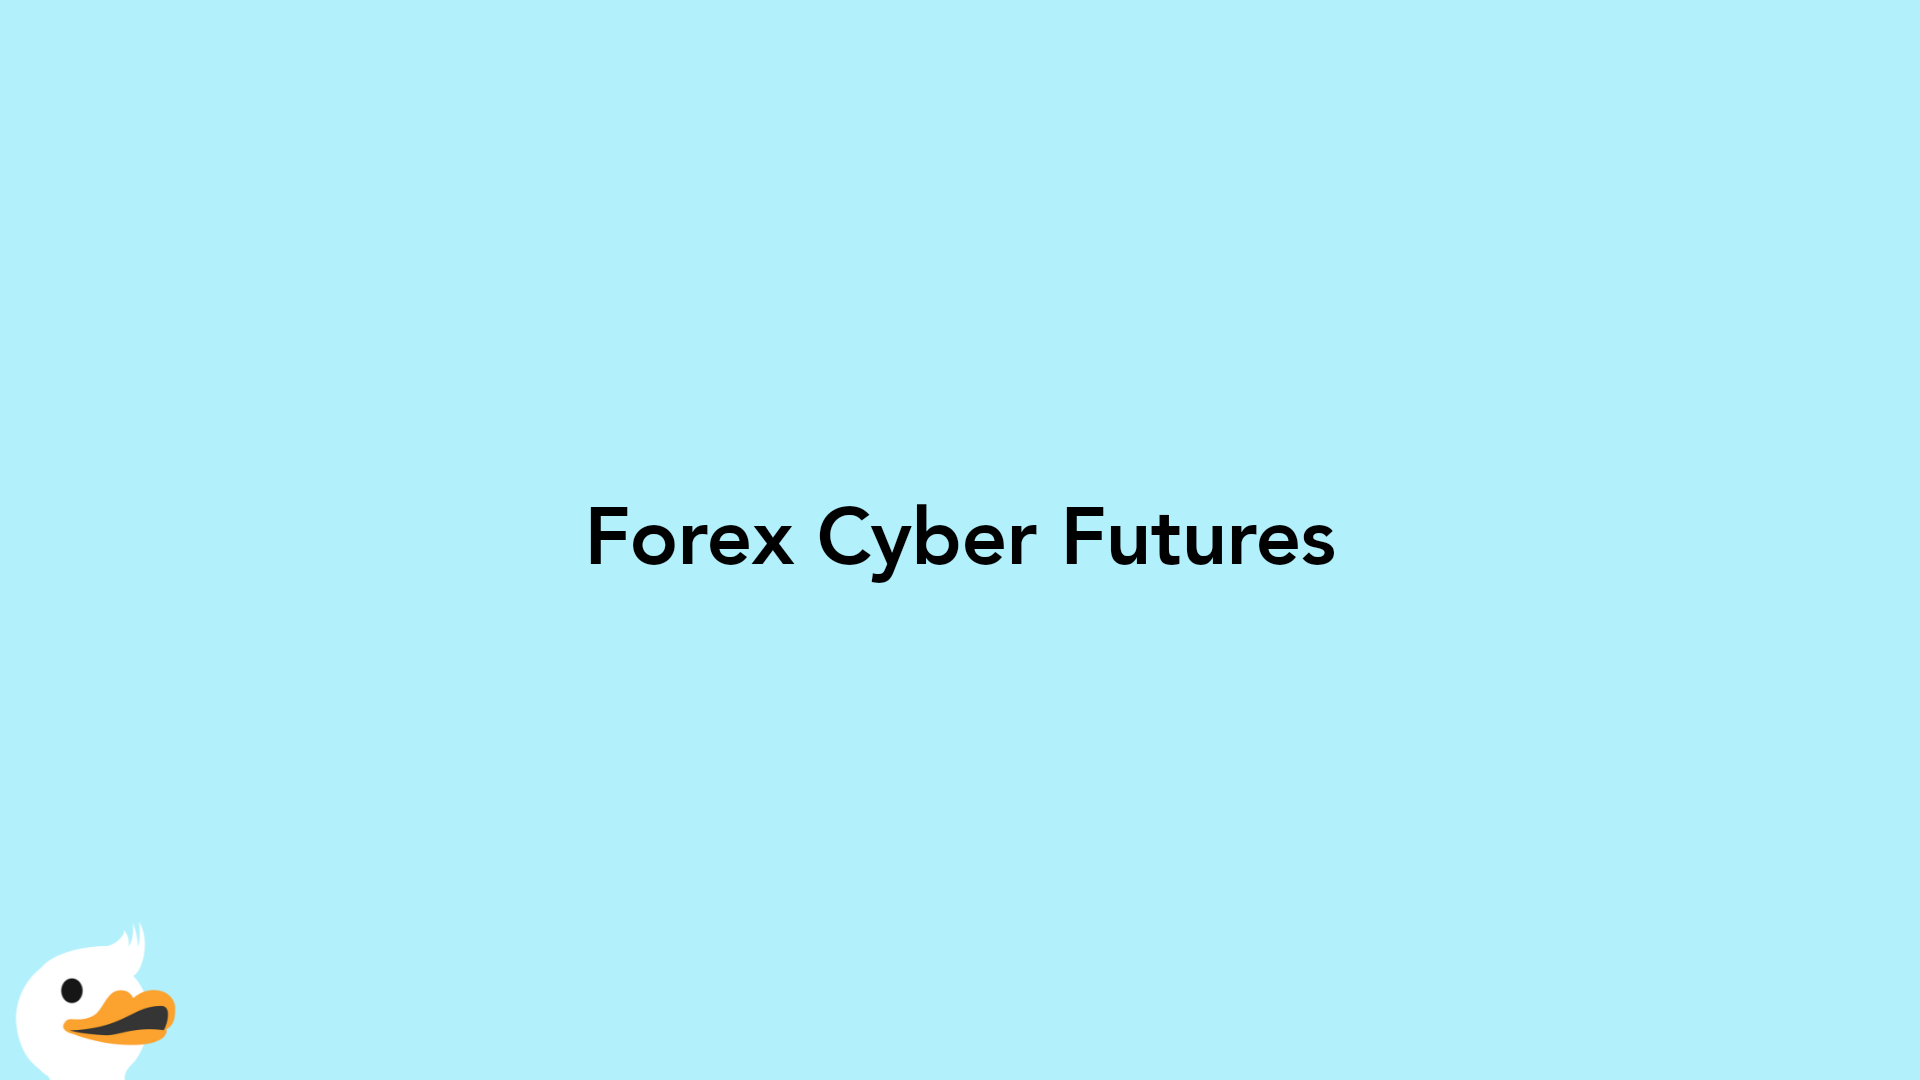 Forex Cyber Futures